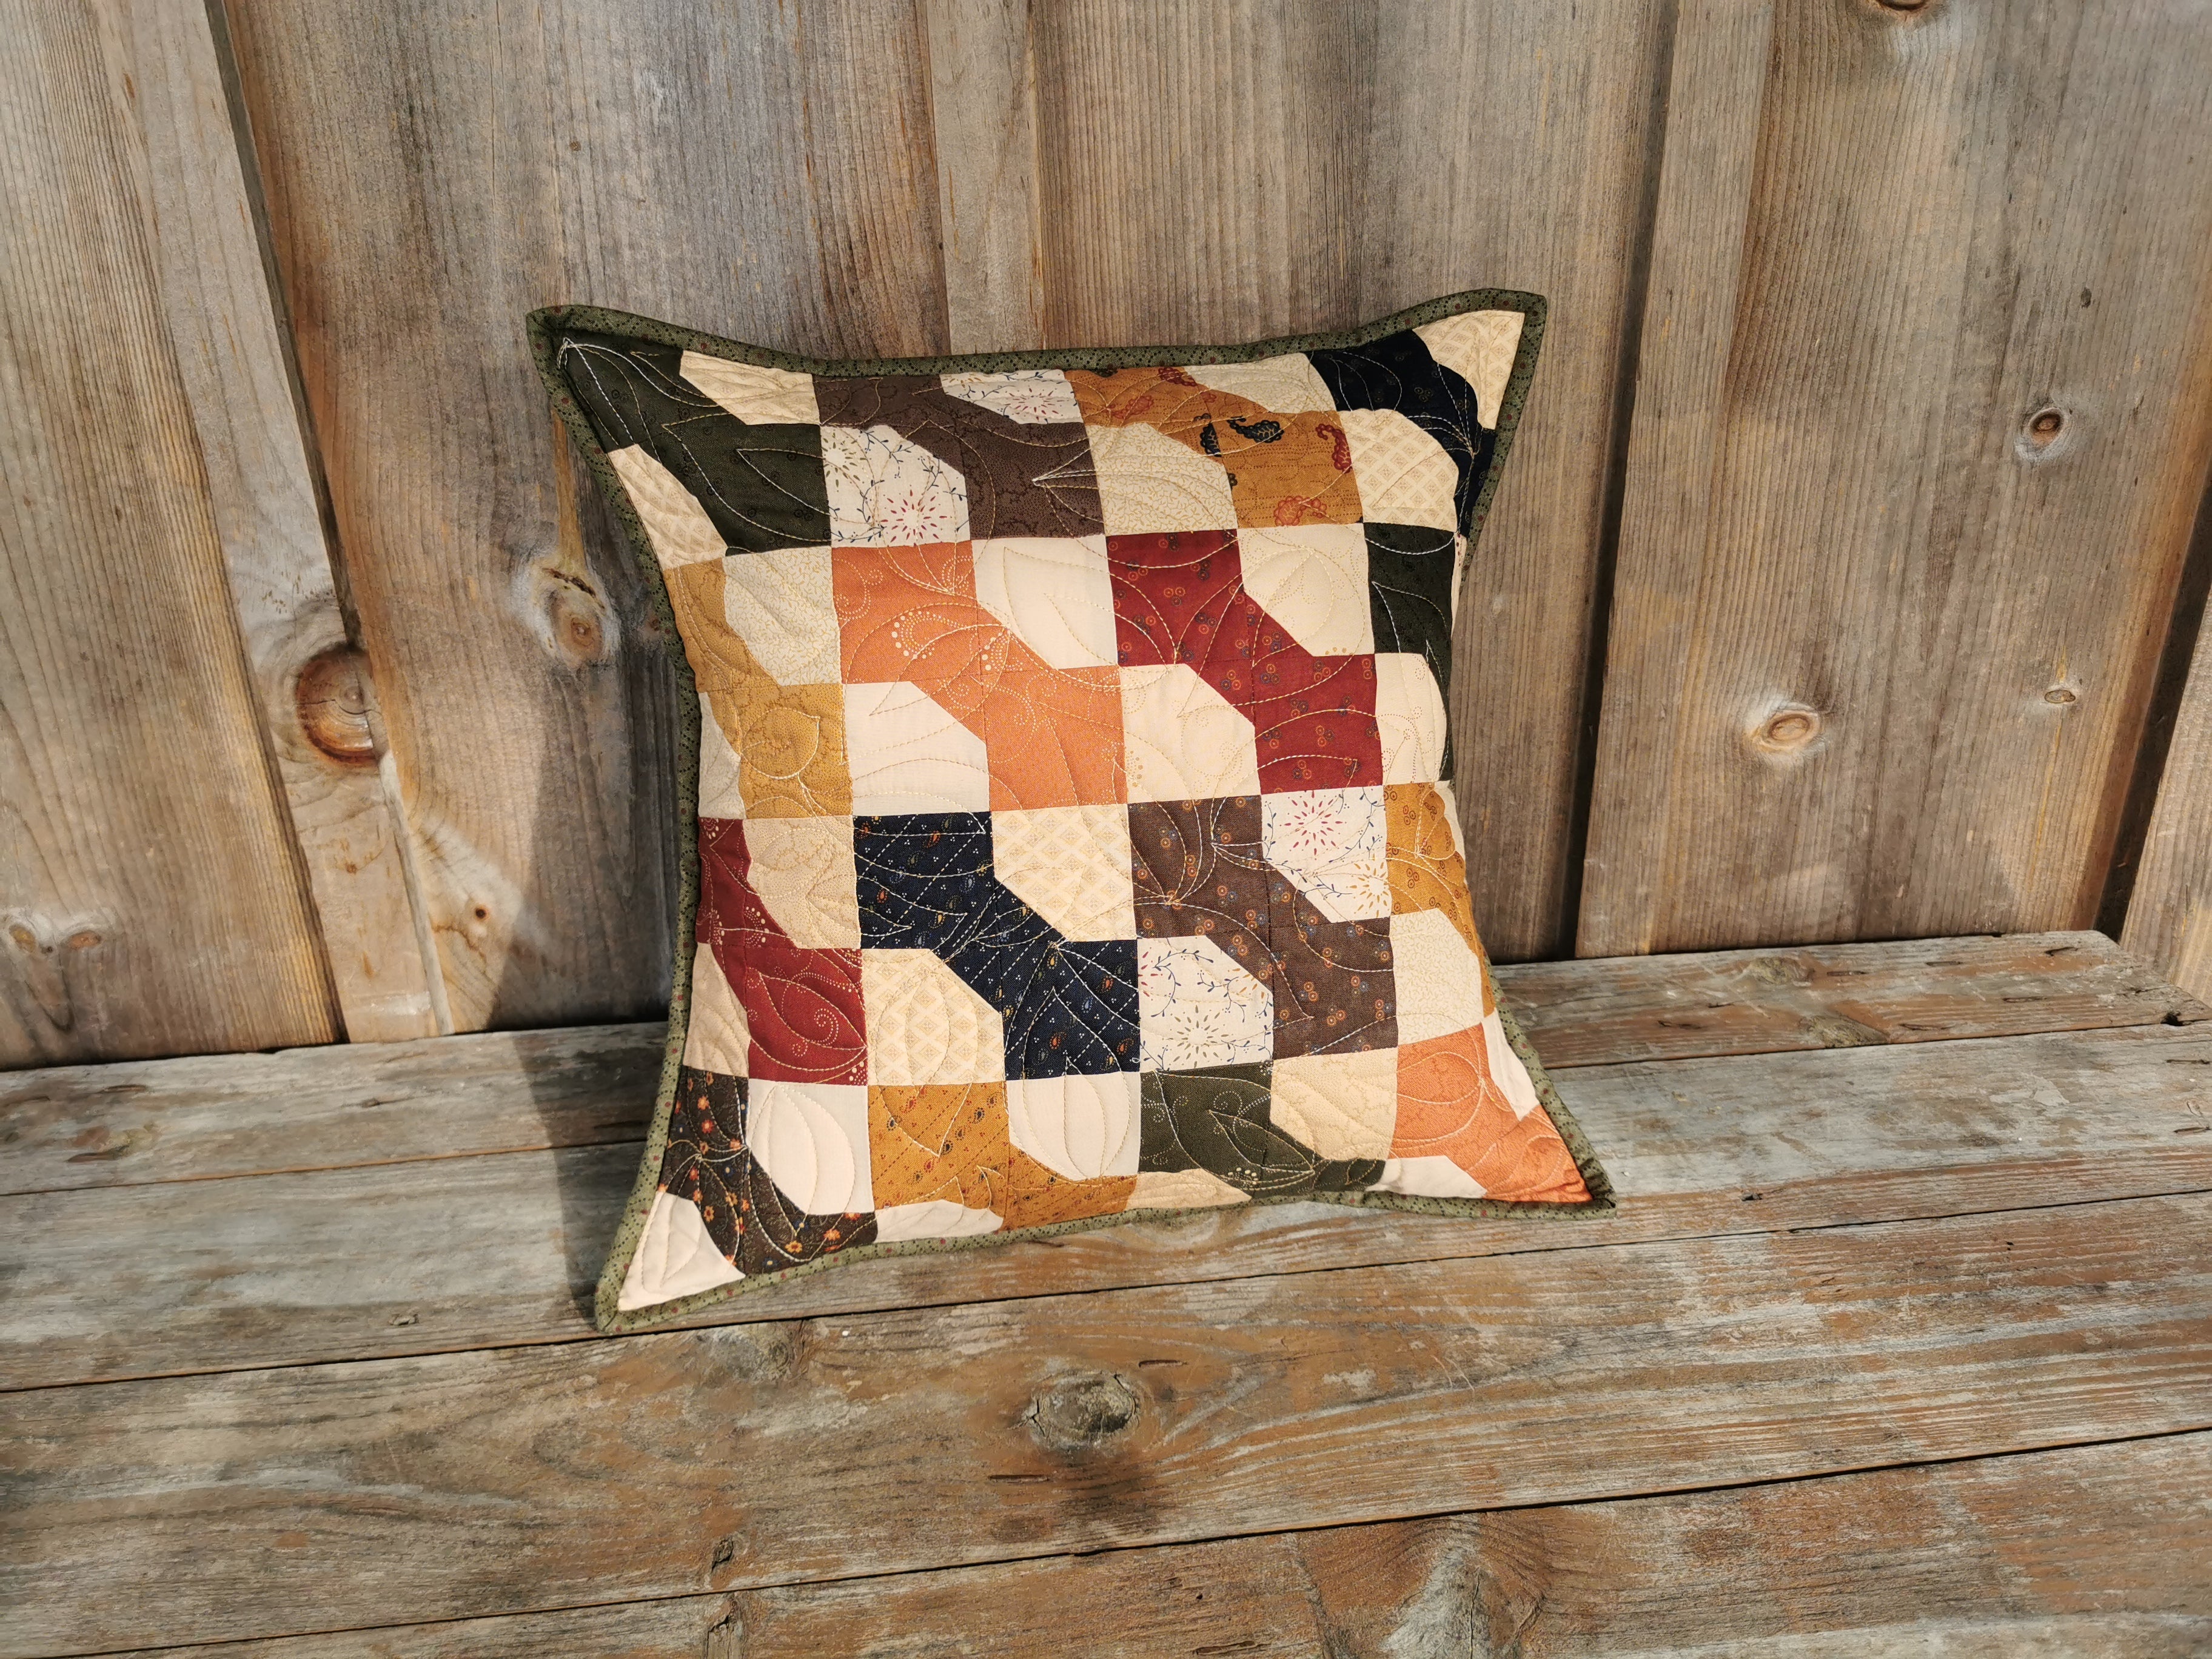 This quilted toss cushion has a country feel with the colorful bowtie patchwork. Bowties colors are: navy, brown, burnt orange, forest green, antique gold and country red. The beige background has a scrappy look using various coordinating fabrics. A lovely, rustic country look.